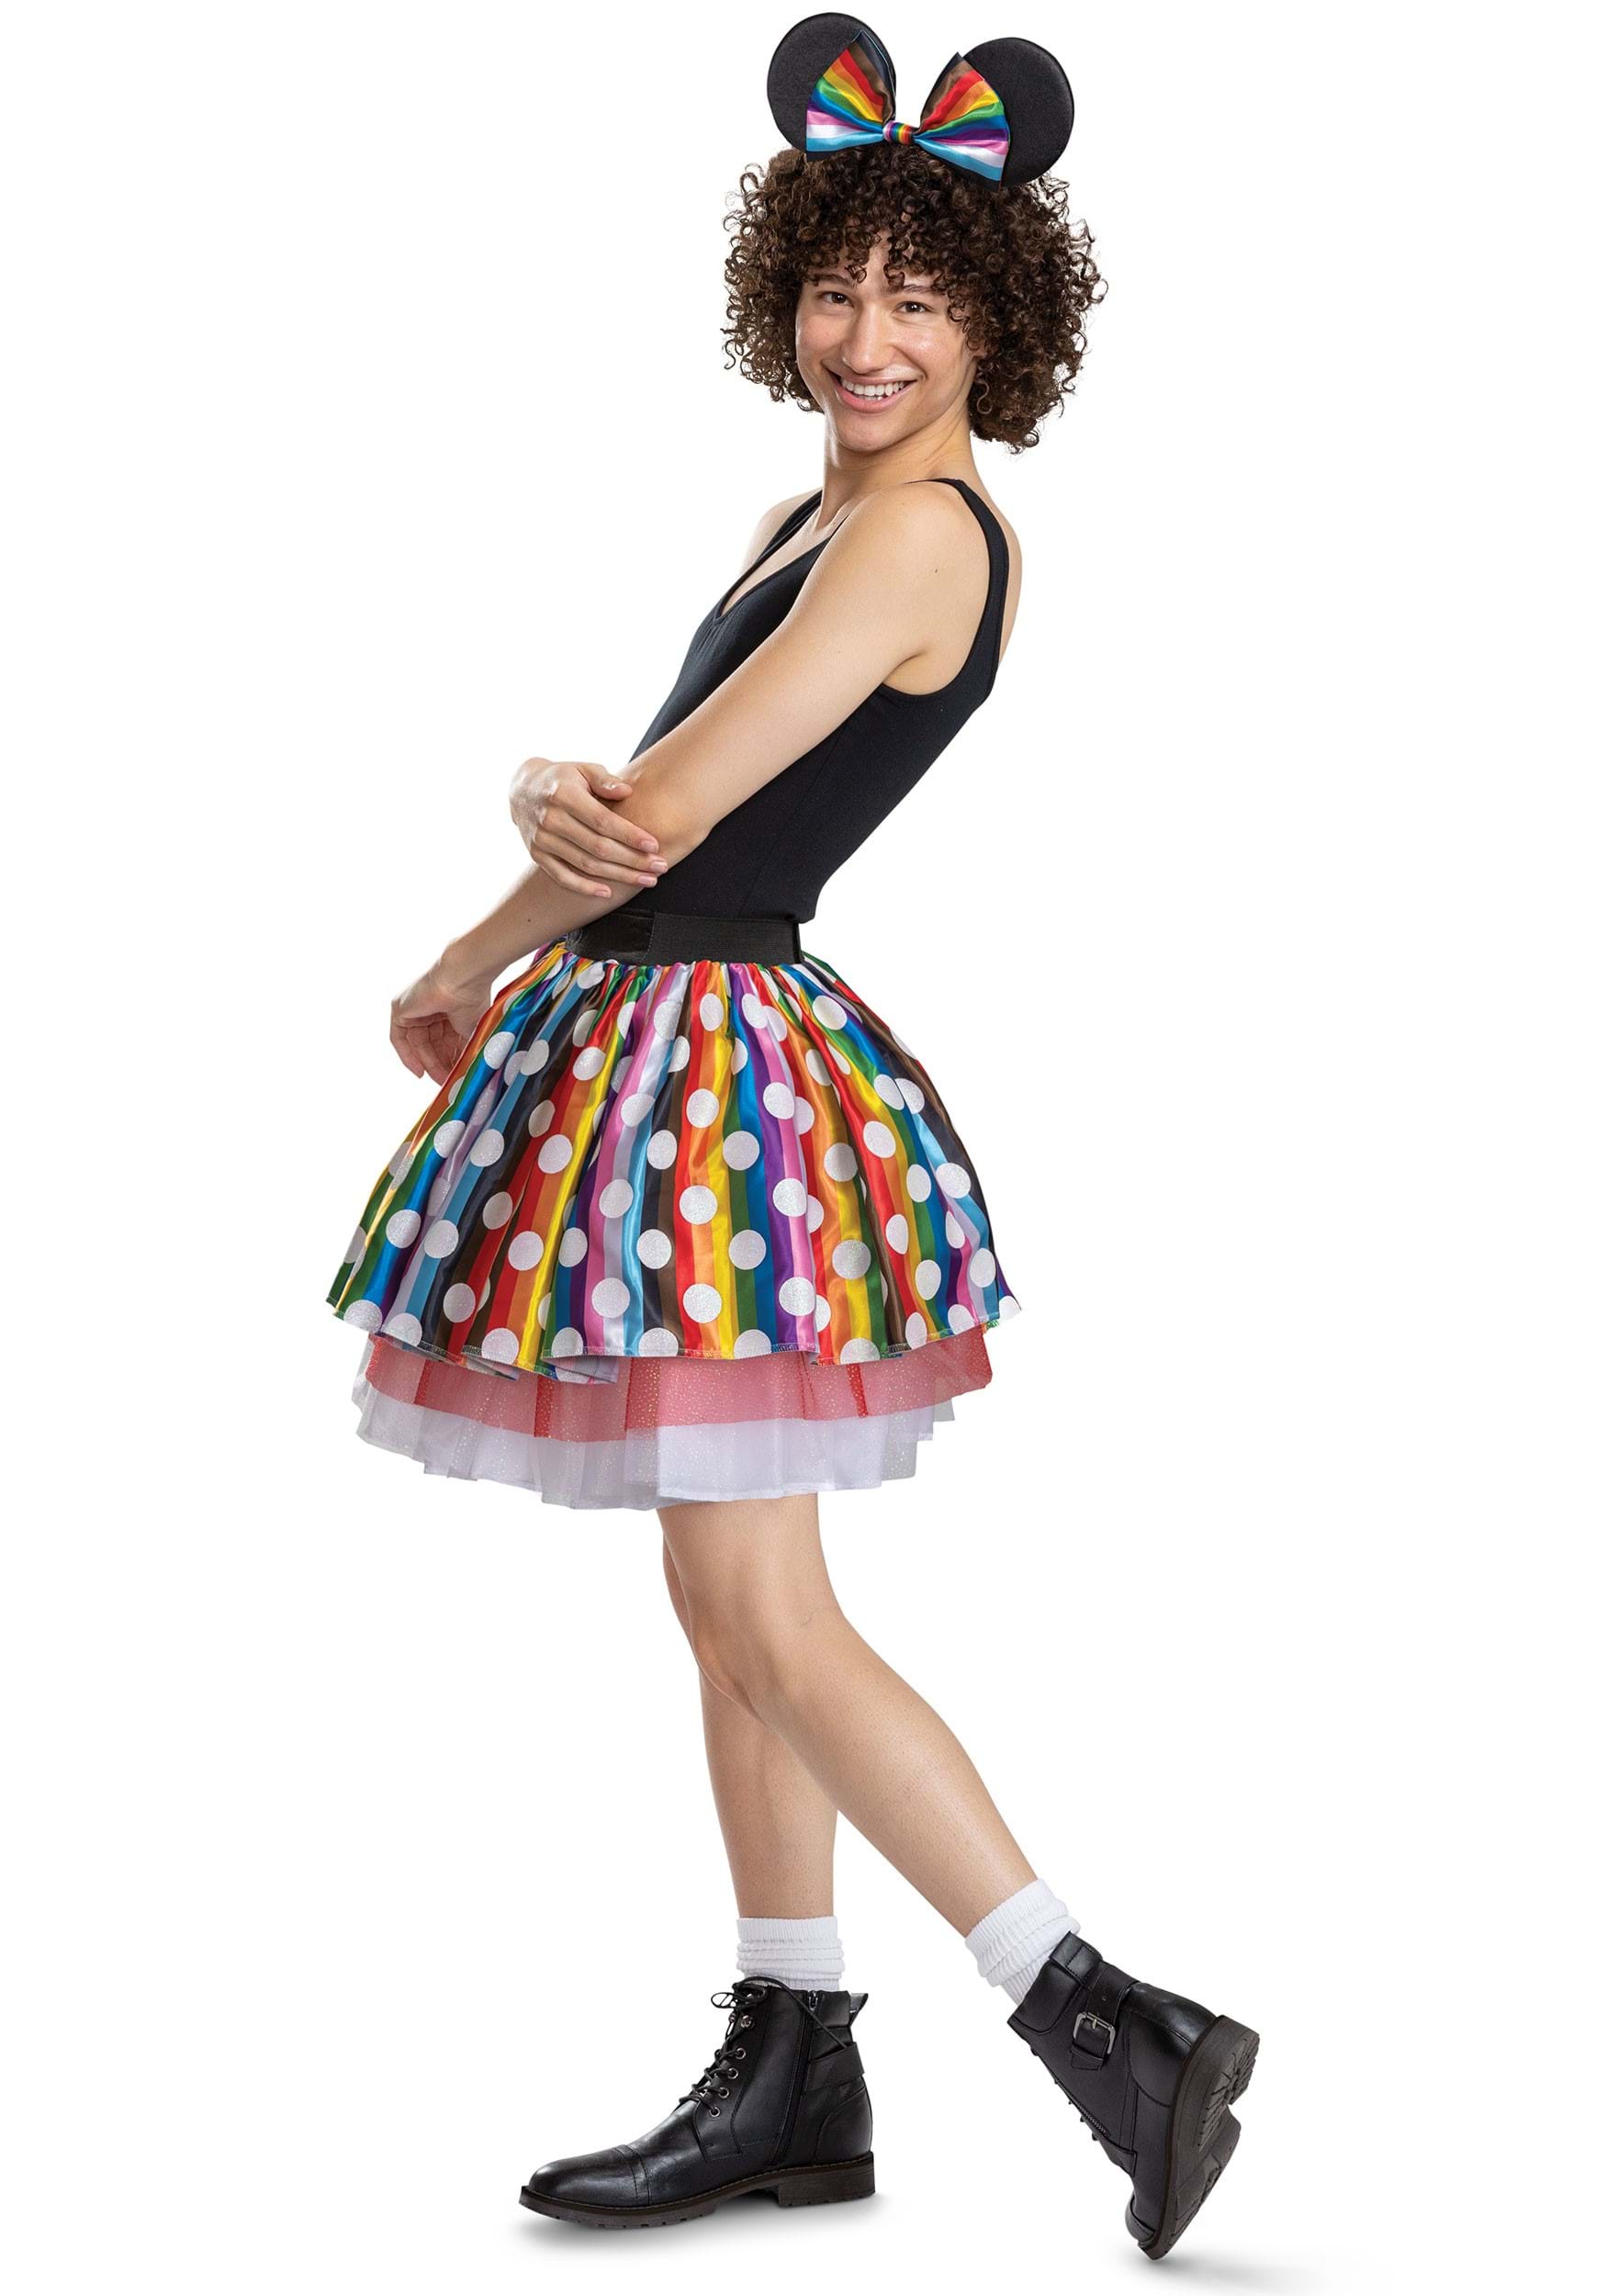 Disney Pride Minnie Mouse Fancy Dress Costume For Adults